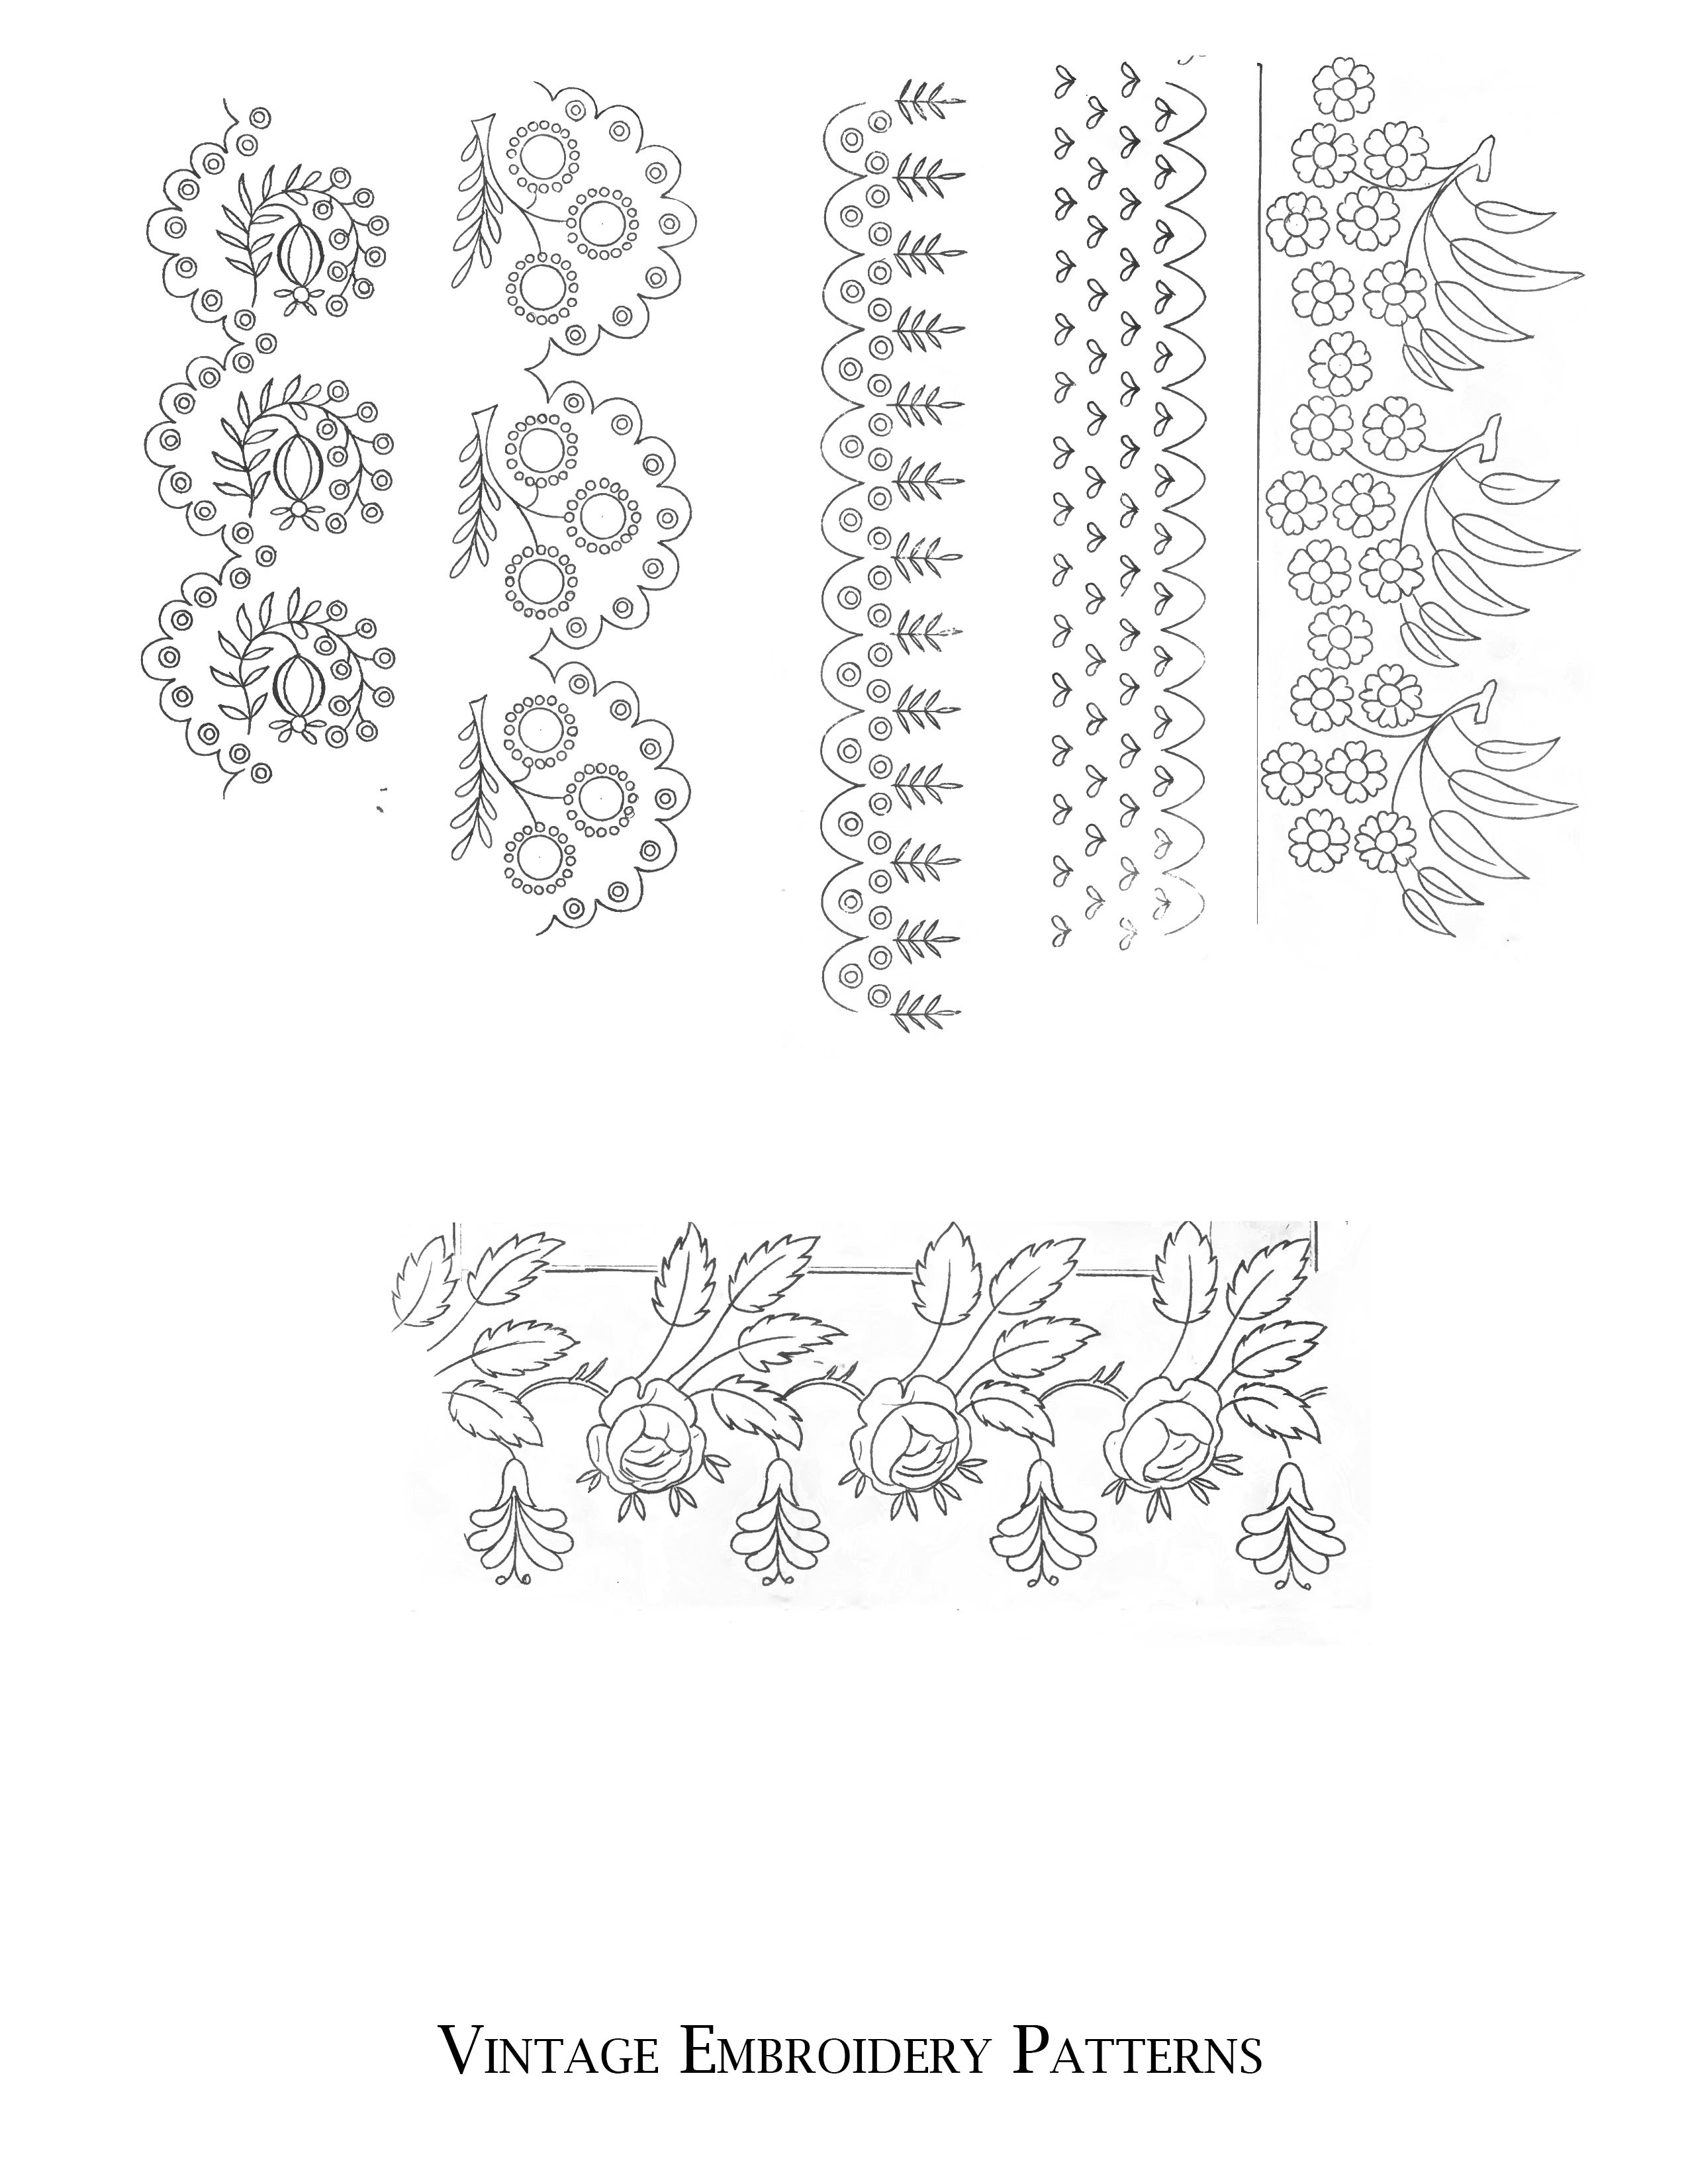 Antique Embroidery Patterns Embroidery Patterns Archives Page 2 Of 2 The Graffical Muse